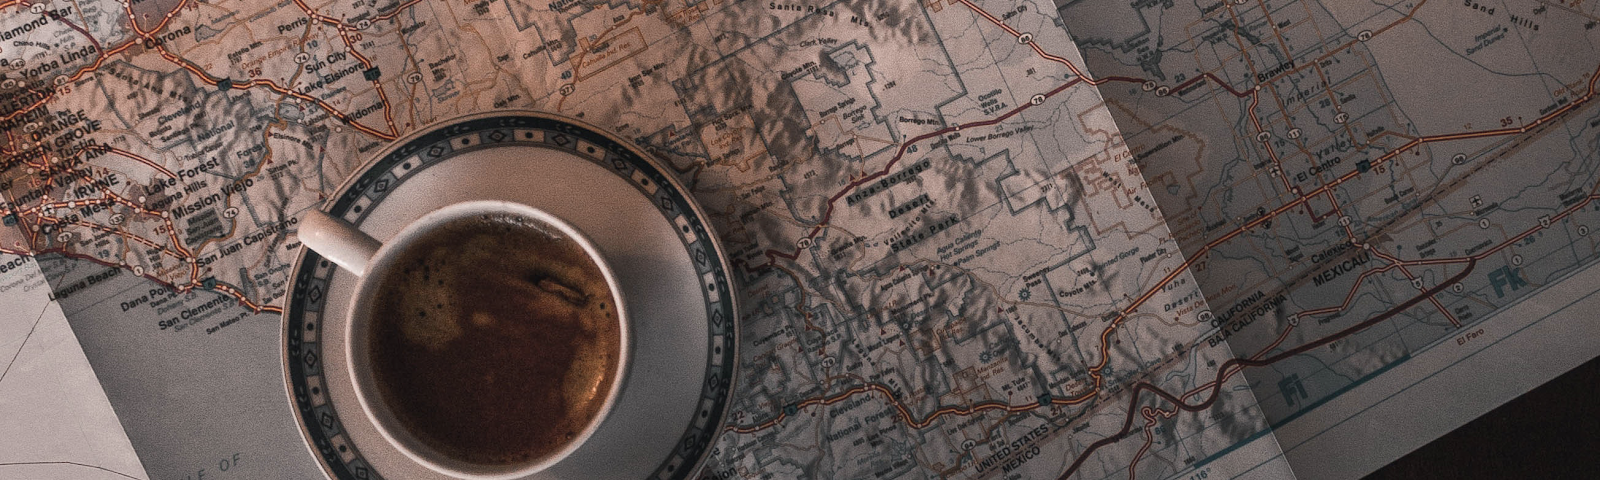 A cup of coffee sitting on a saucer that is sitting on a highway map